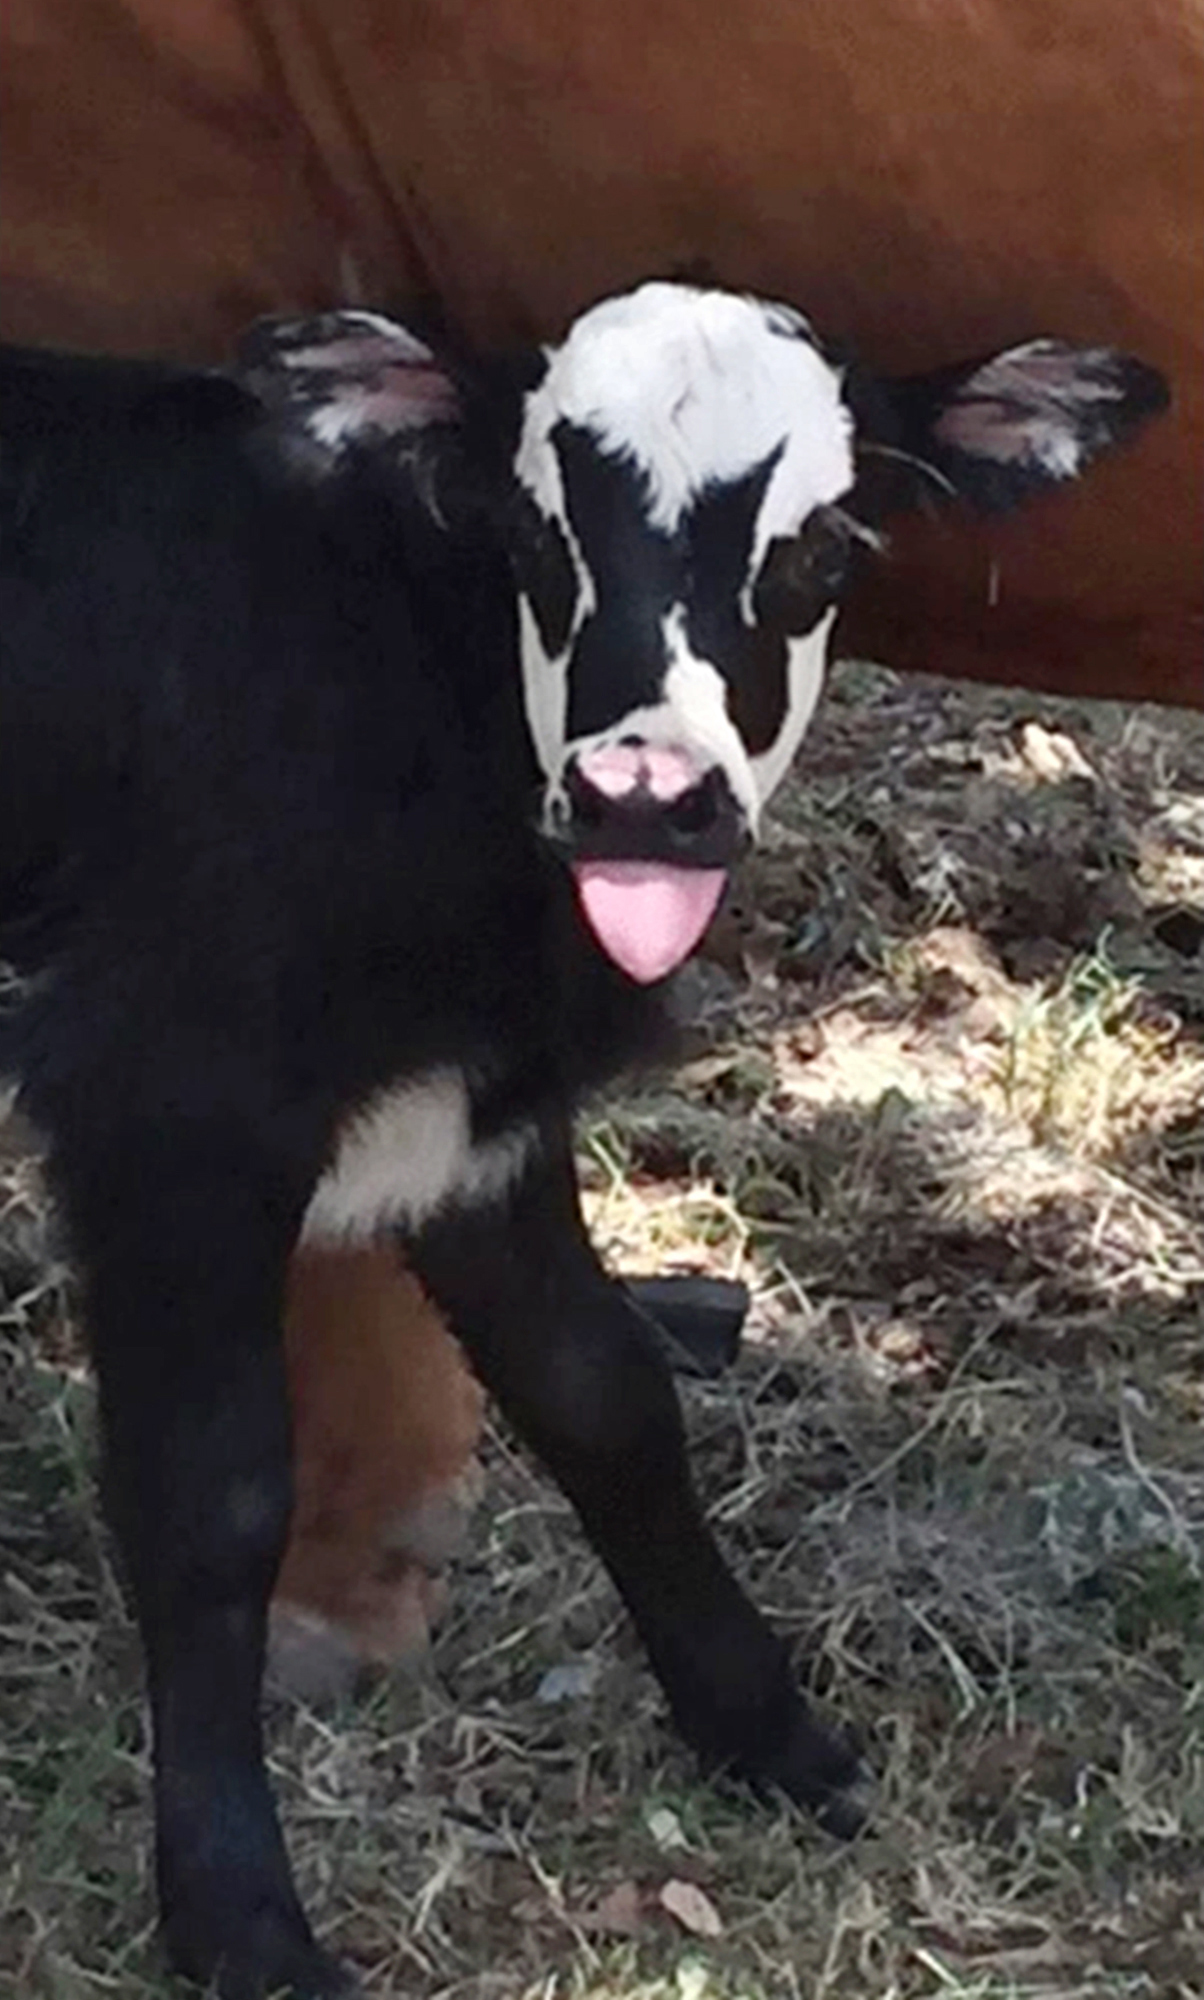 PHOTO: This July 28, 2017, photo provided by Hill Country Visitor in Kerrville, Texas, shows a newborn calf named Genie with facial marking that resemble Gene Simmons, bass player for the rock group KISS, shortly after its birth in Kerrville.